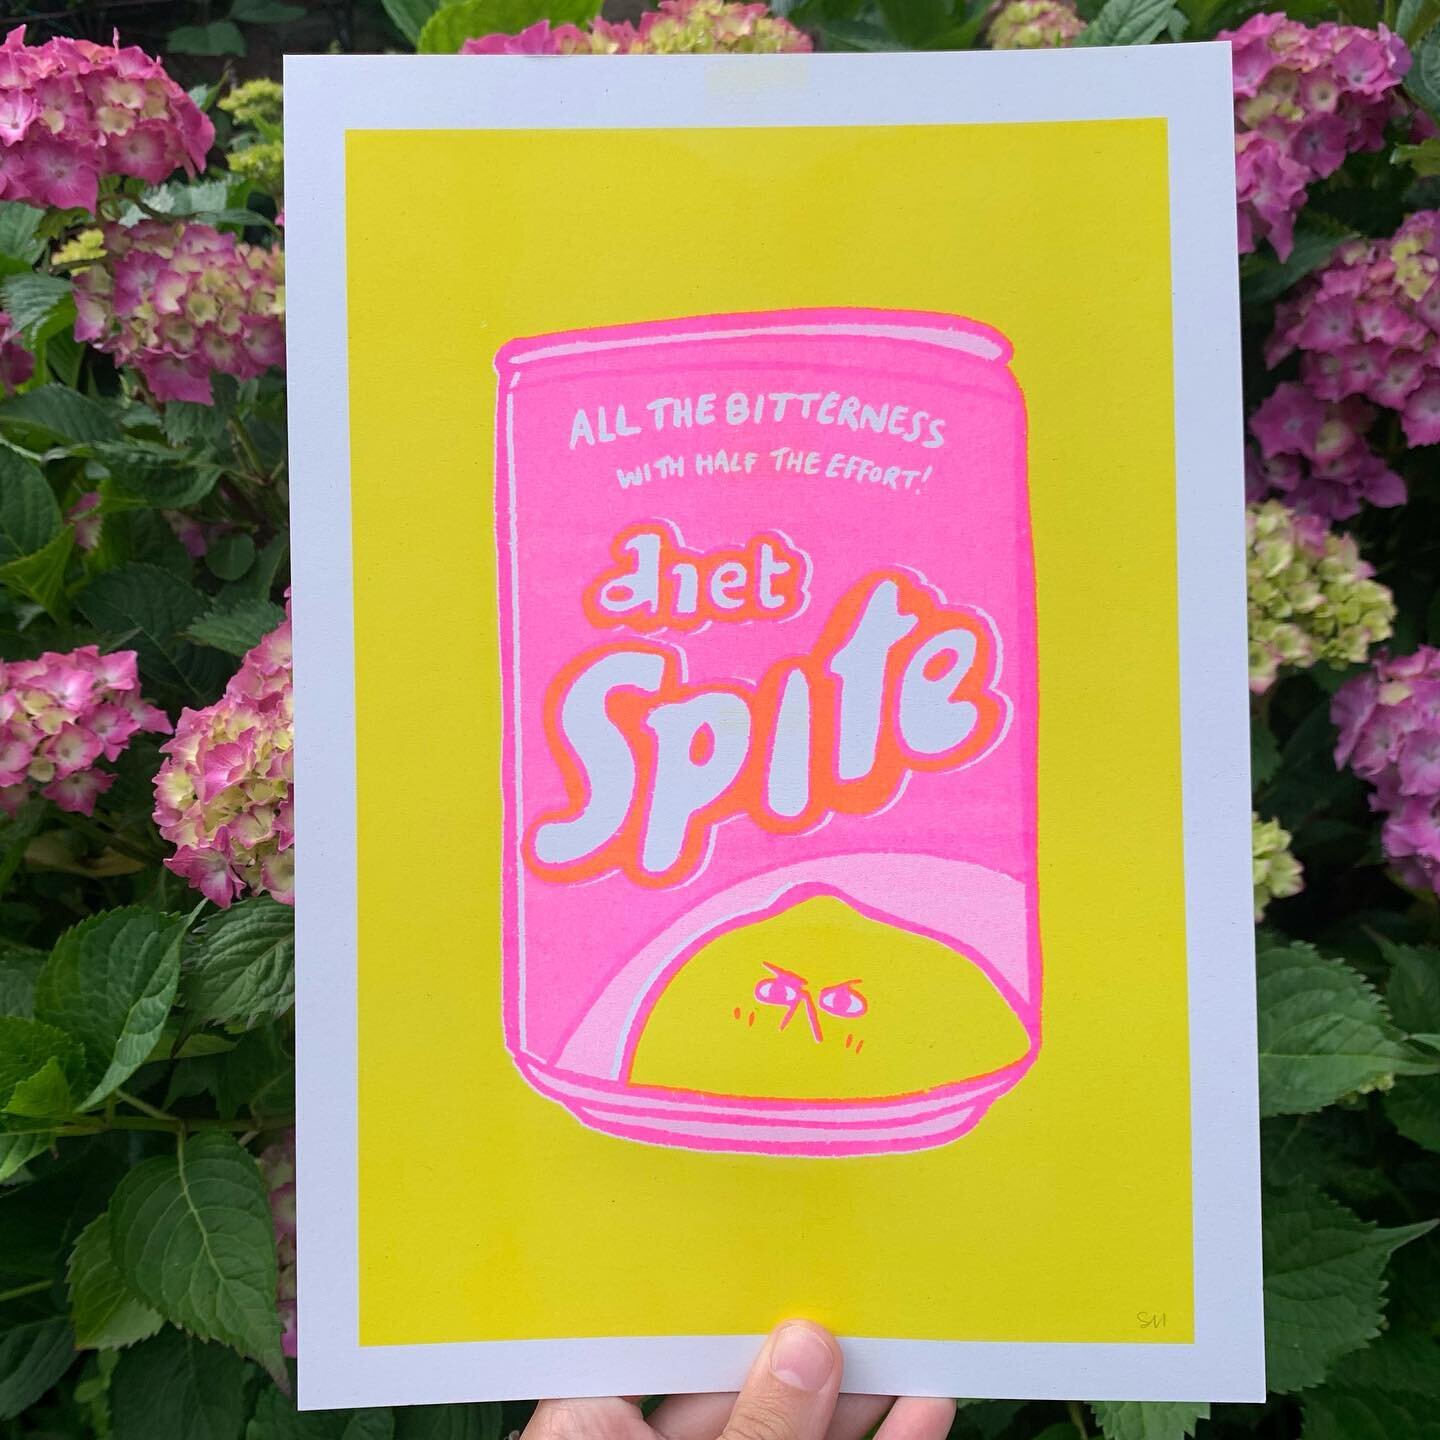 🍹DIET SPITE🍋
Hooray; the Pink Diet Spite Print is back at full capacity! This print has a special place in my heart (and not just because it wasn&rsquo;t causing me too many difficulties to print today 😇). It&rsquo;s silly, it&rsquo;s lemony and i